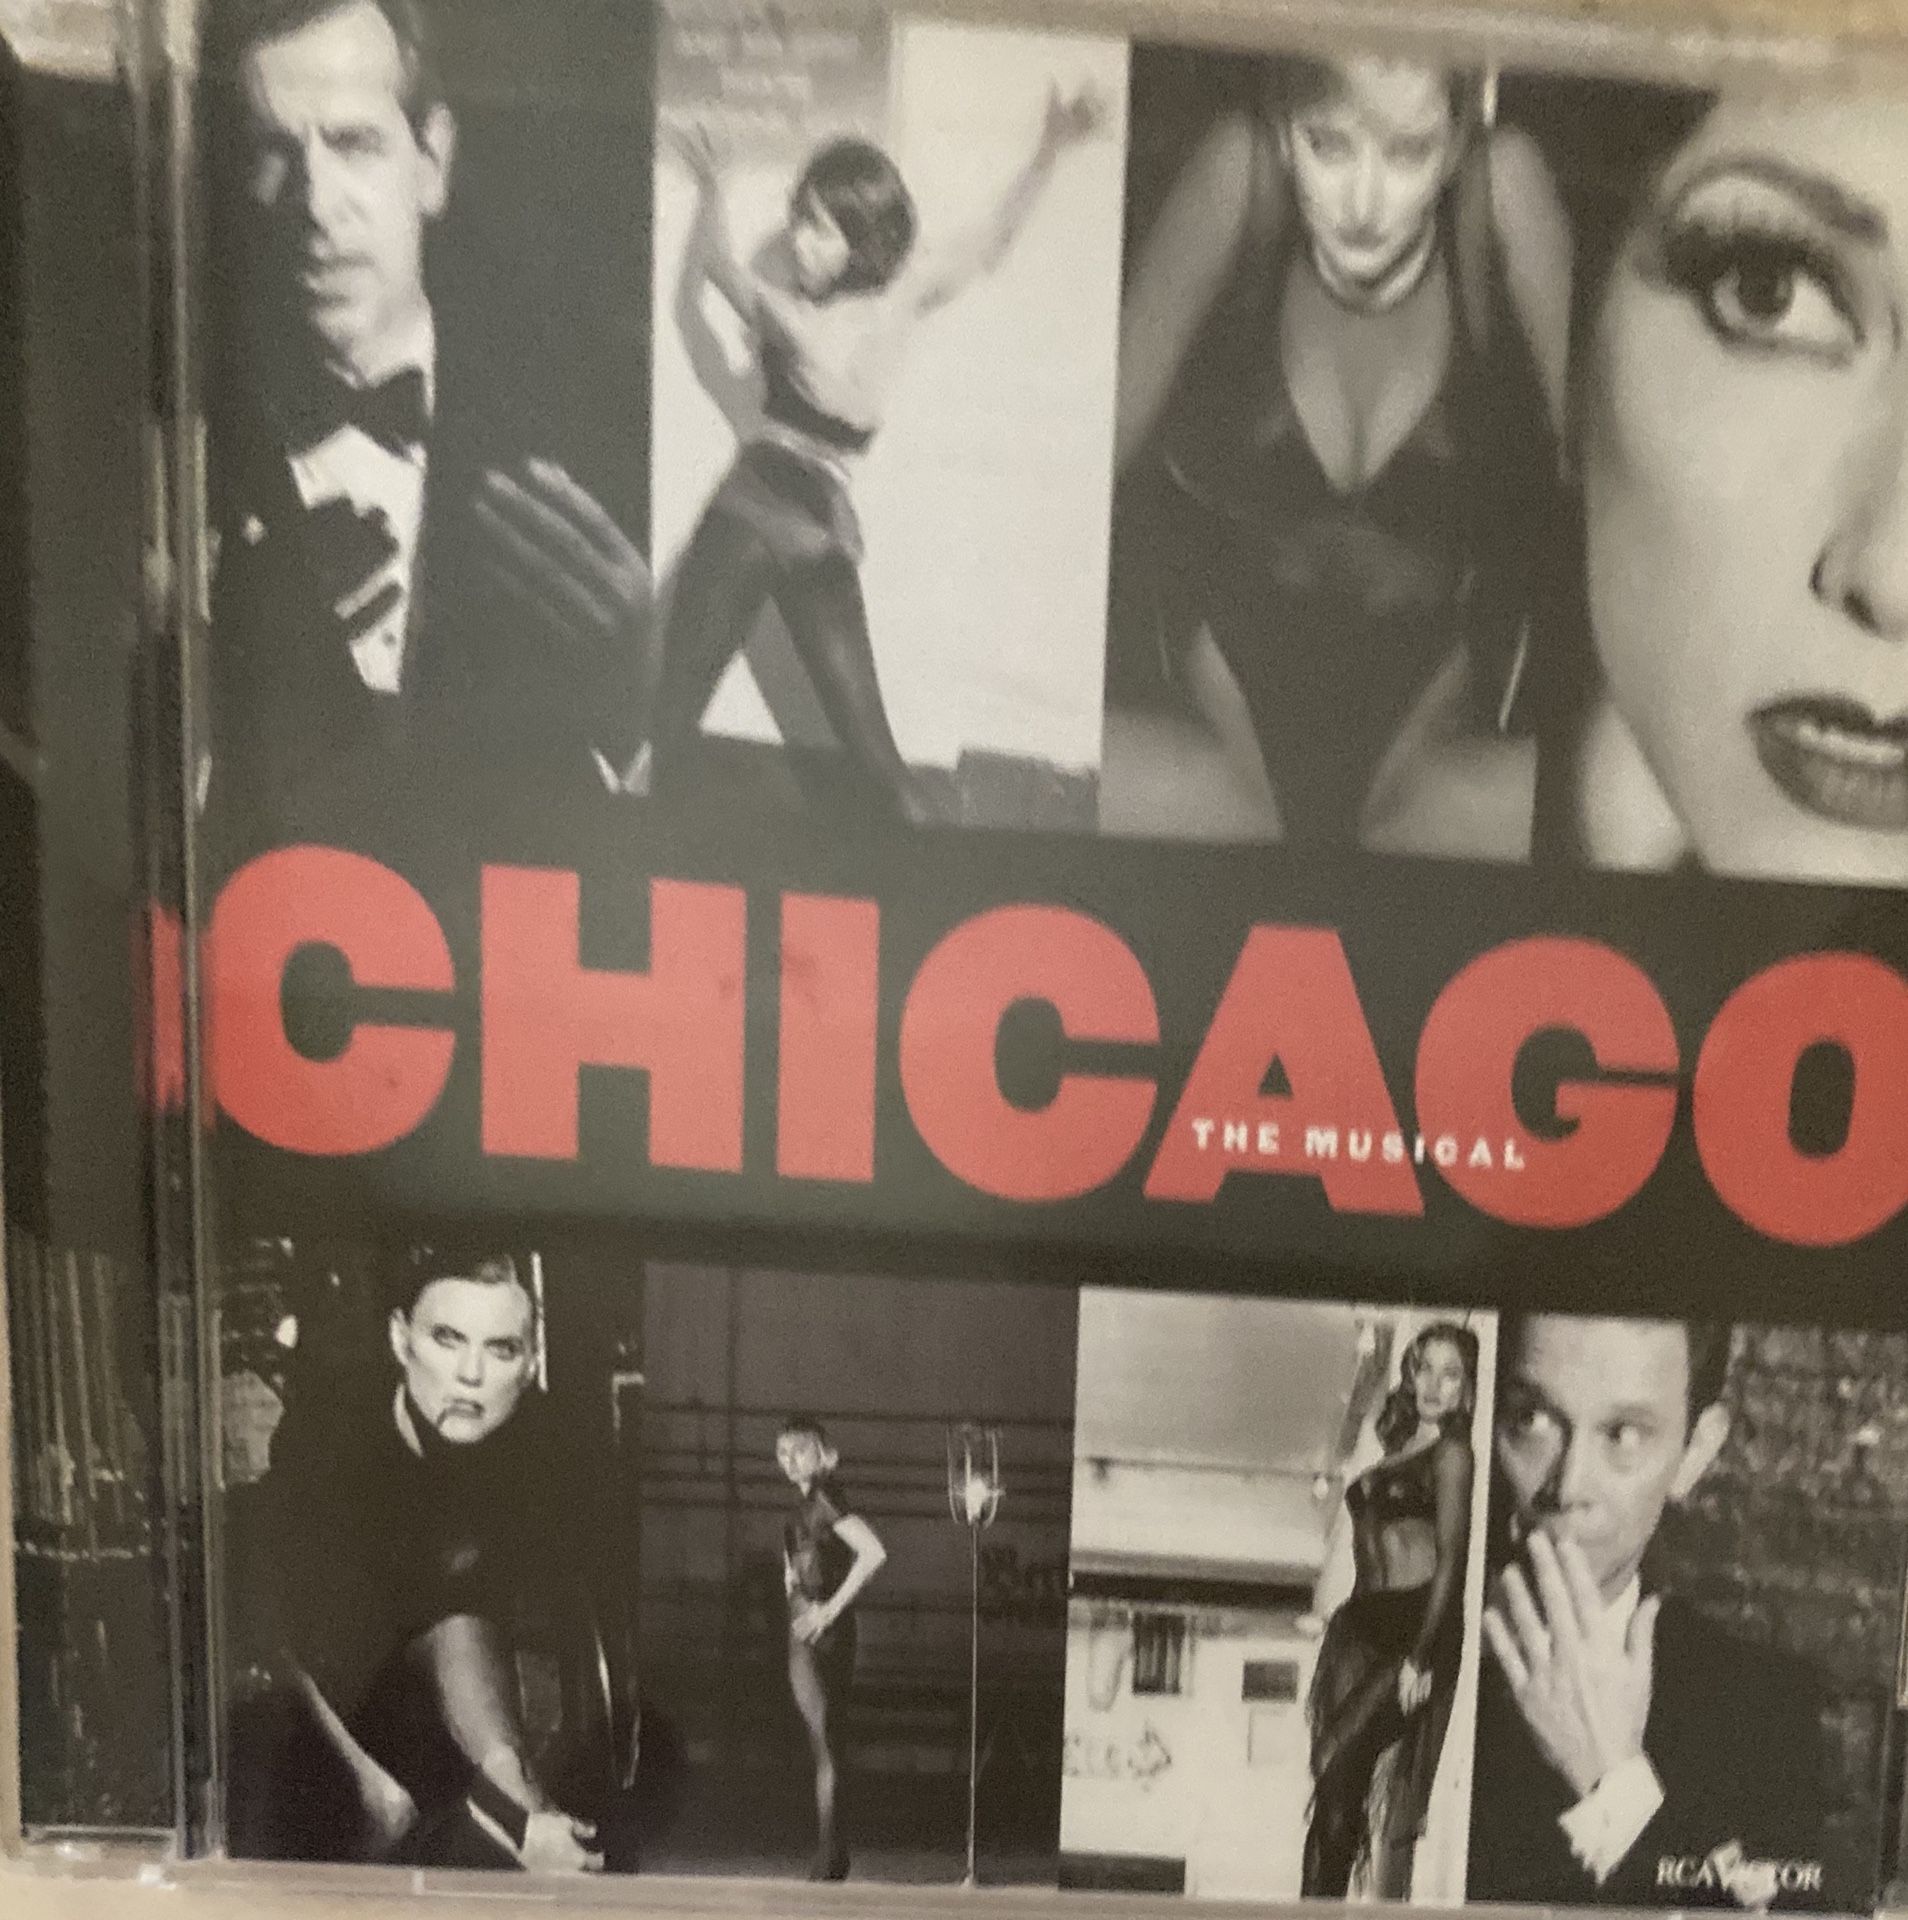 CD THE MUSICAL CHICAGO